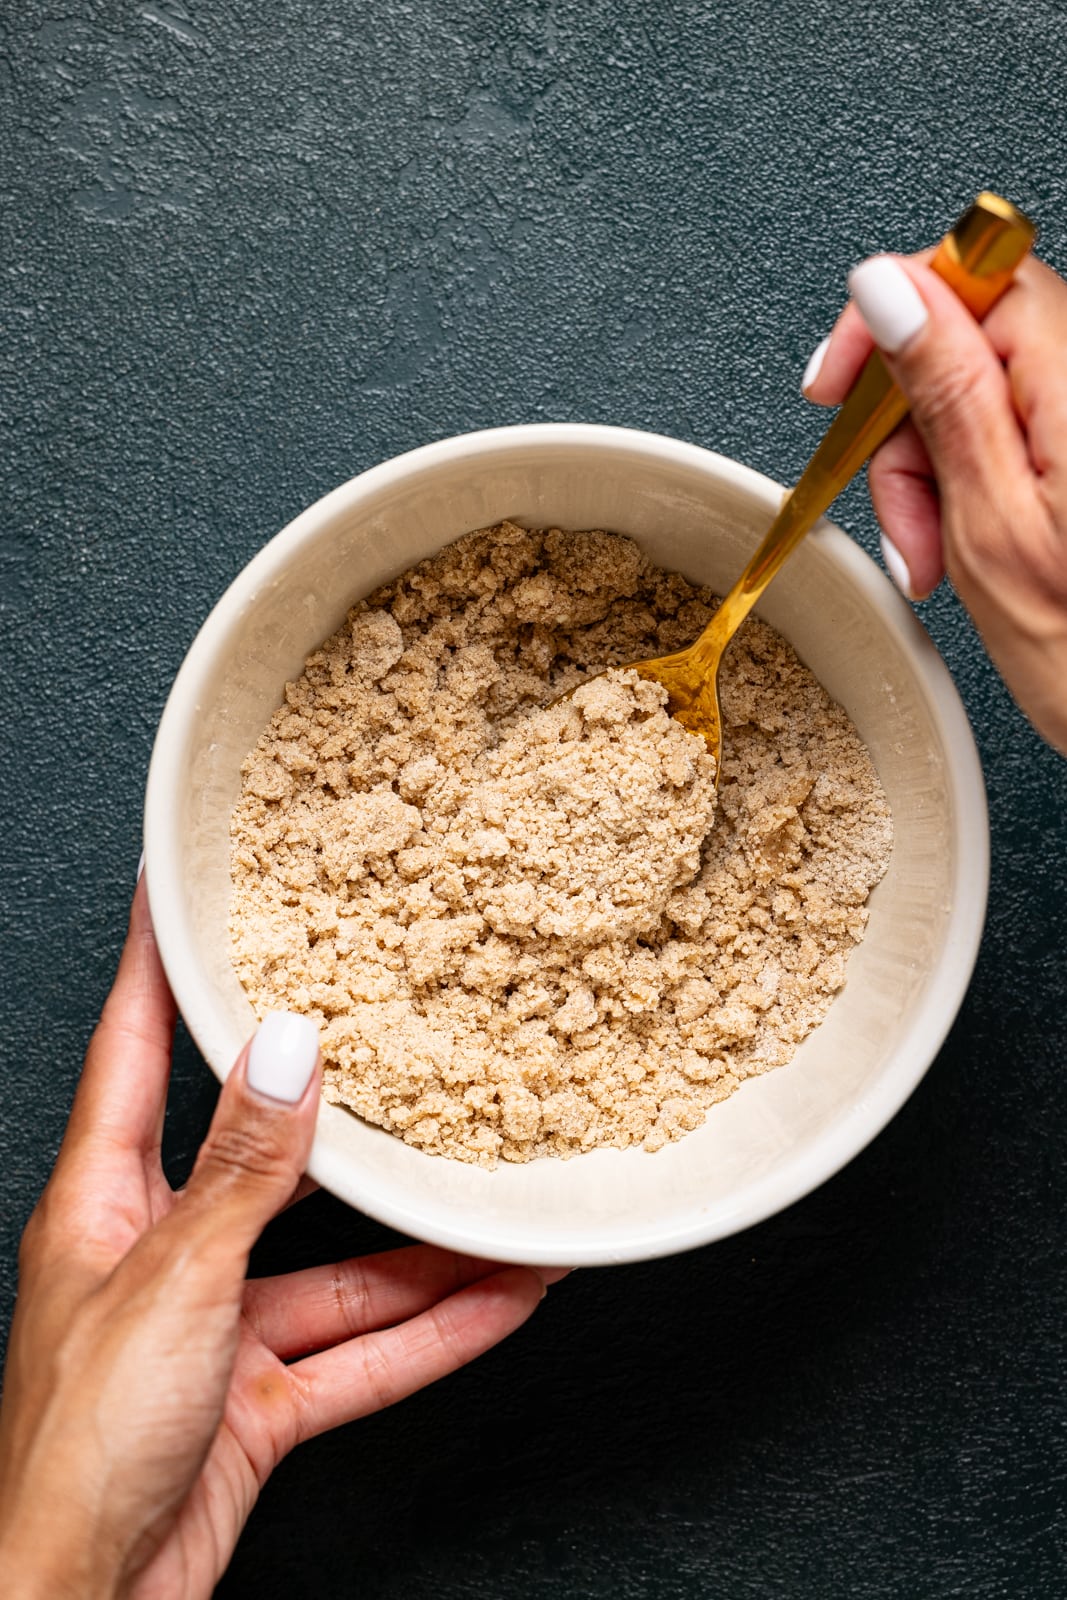 Crunch topping ingredients being stirred together in a bowl.